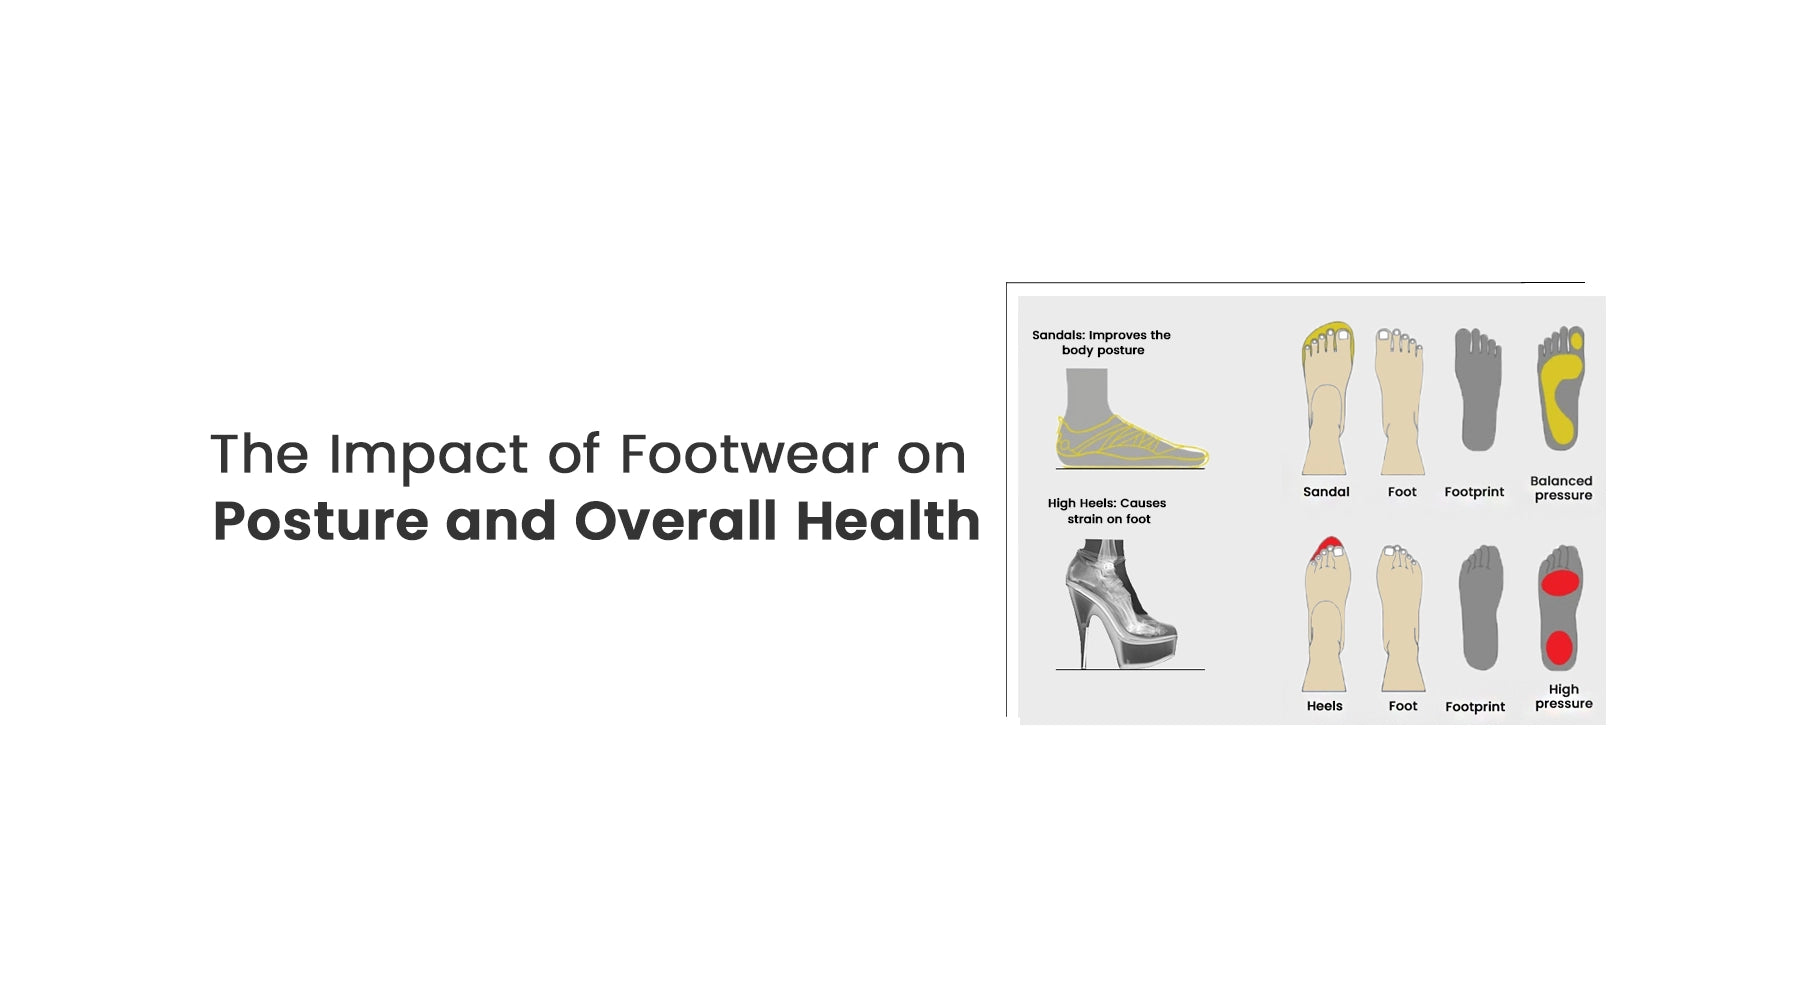 The Impact of Footwear on Posture and Overall Health: Importance of Choosing the Right Sandals